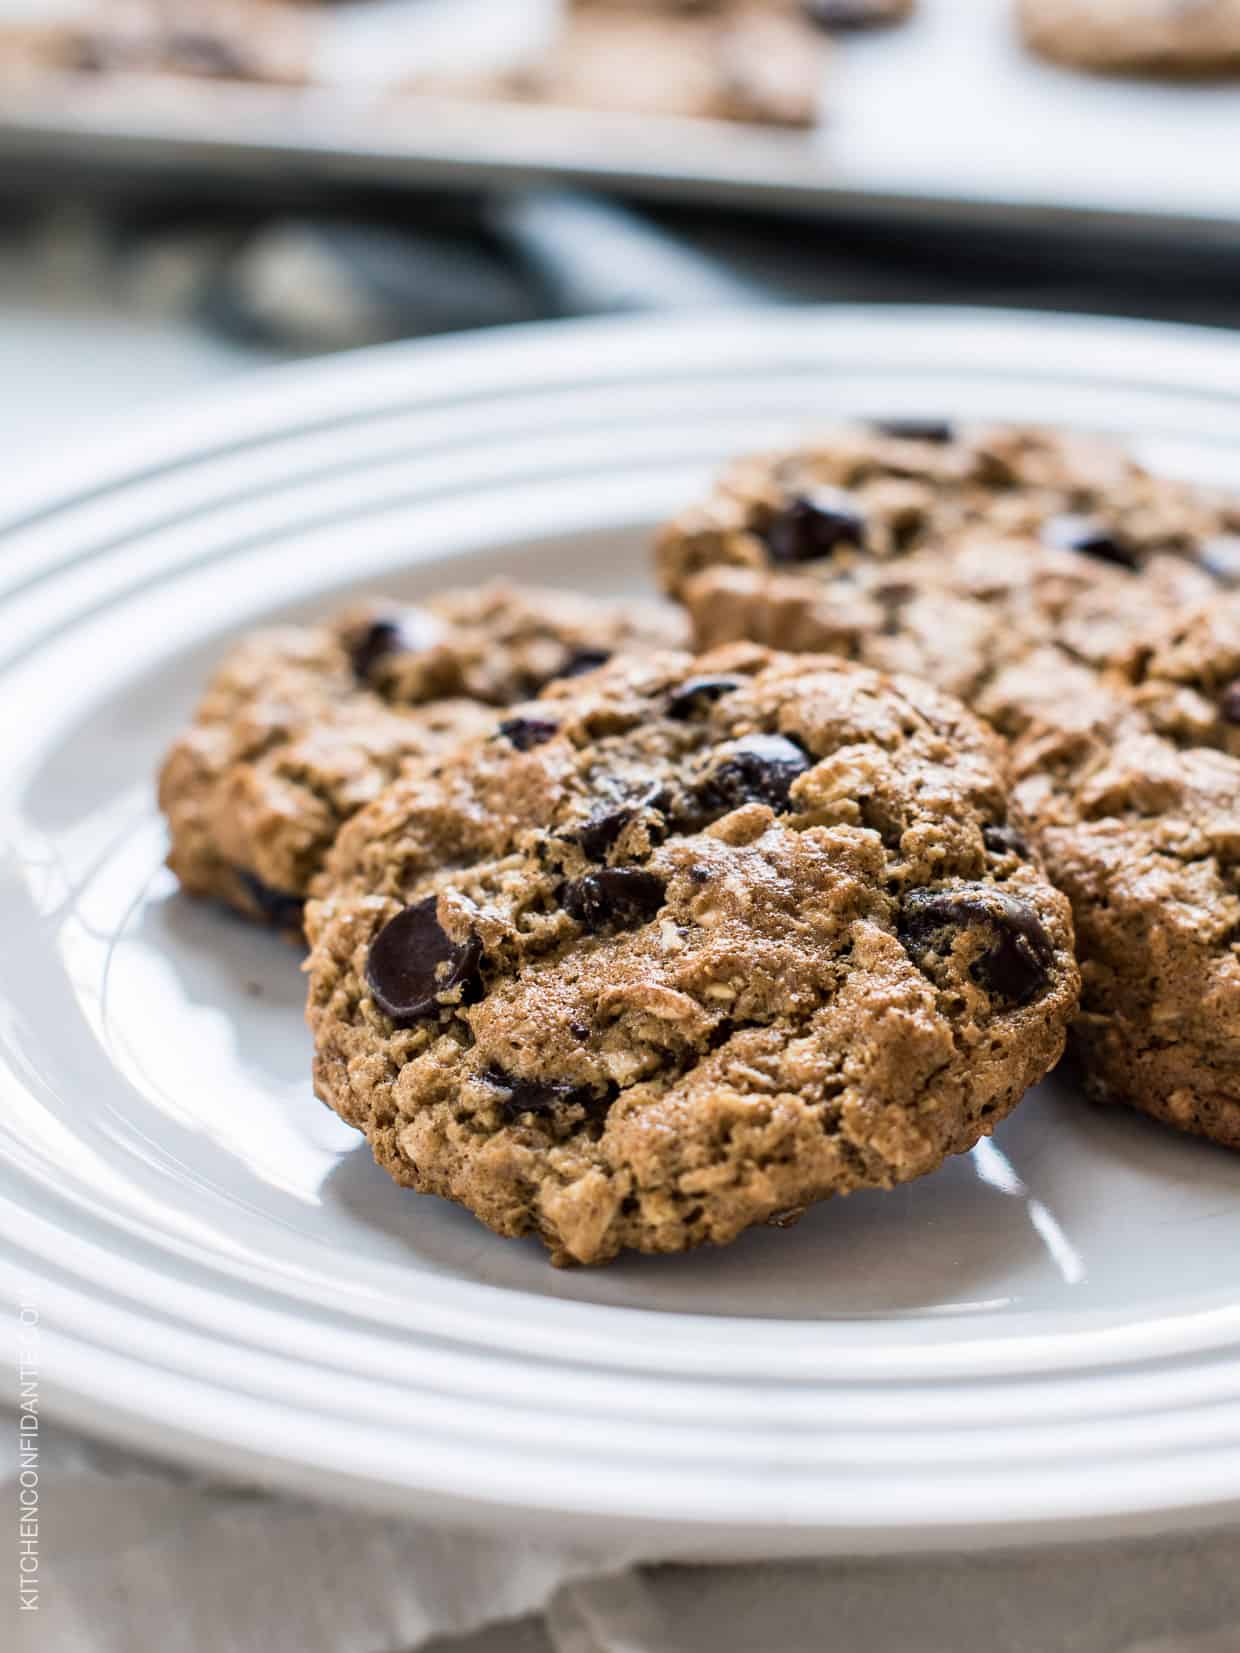 Almond Butter Oatmeal Cookies on a plate.